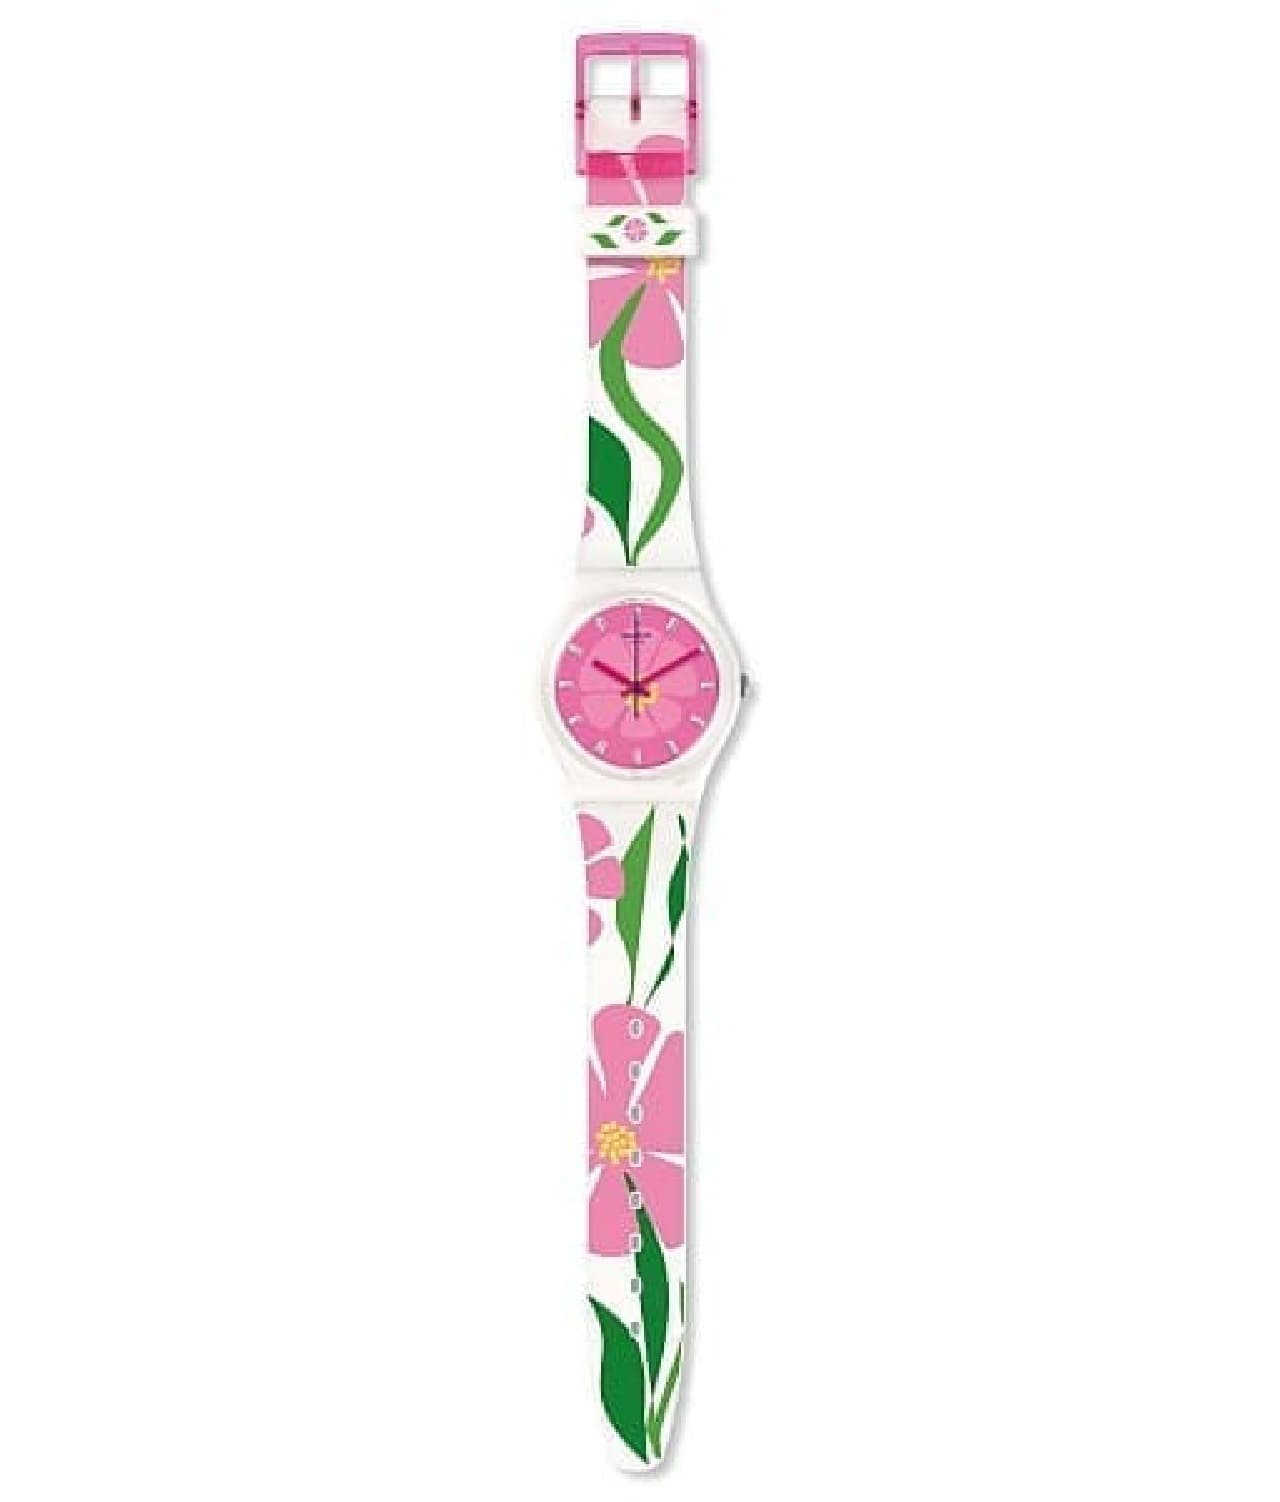 Swatch 2017 Mother's Day model "PRIMEVERE"